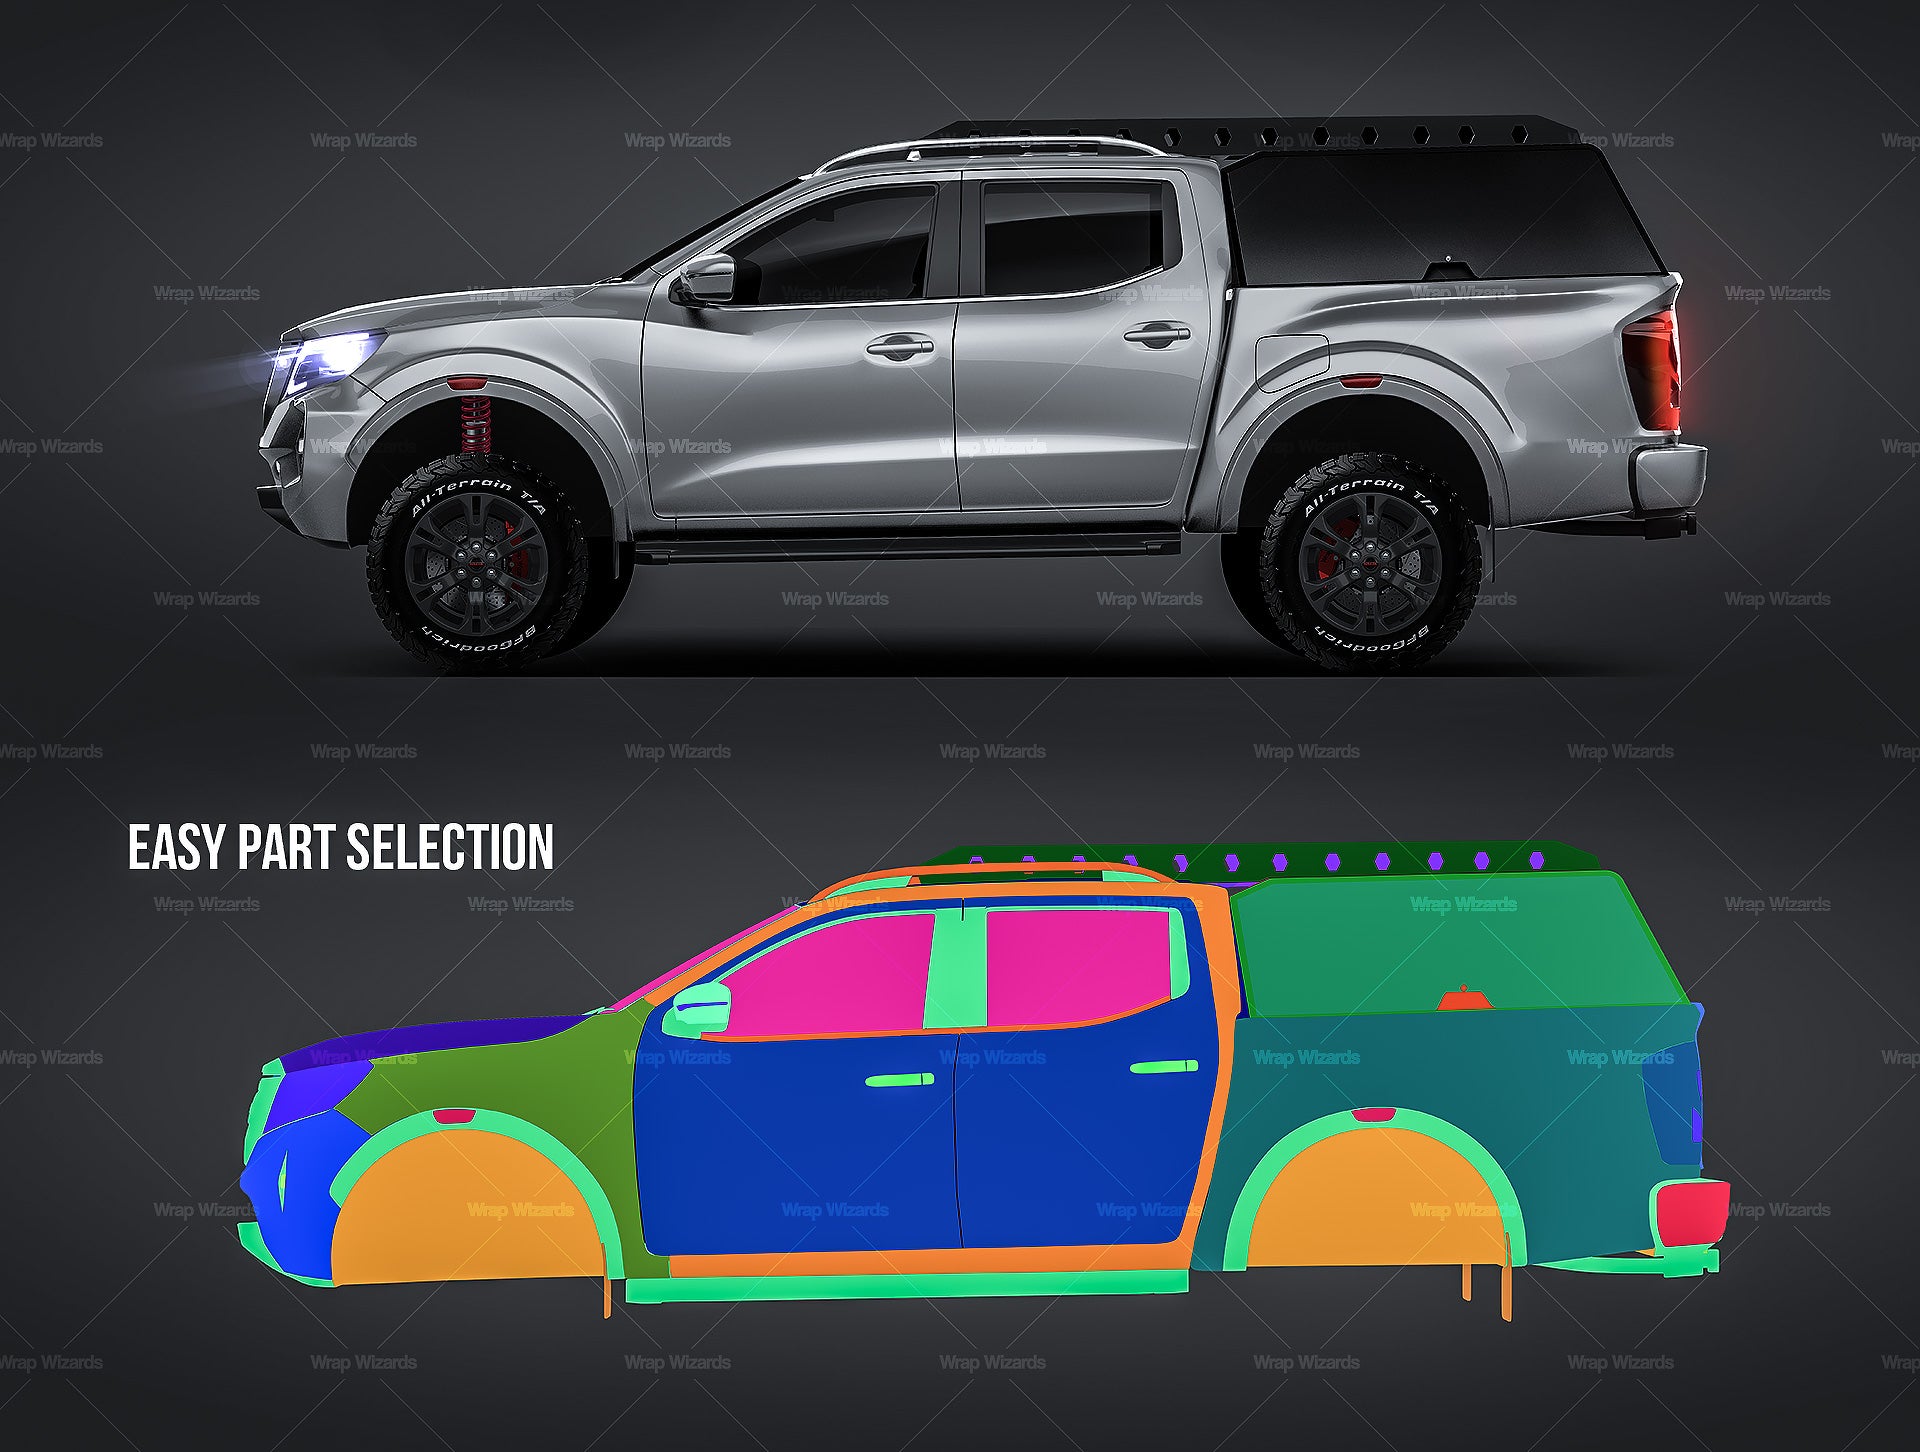 Nissan Navara Double Cab PRO 4X 2022 with canopy and racks glossy finish - all sides Car Mockup Template.psd